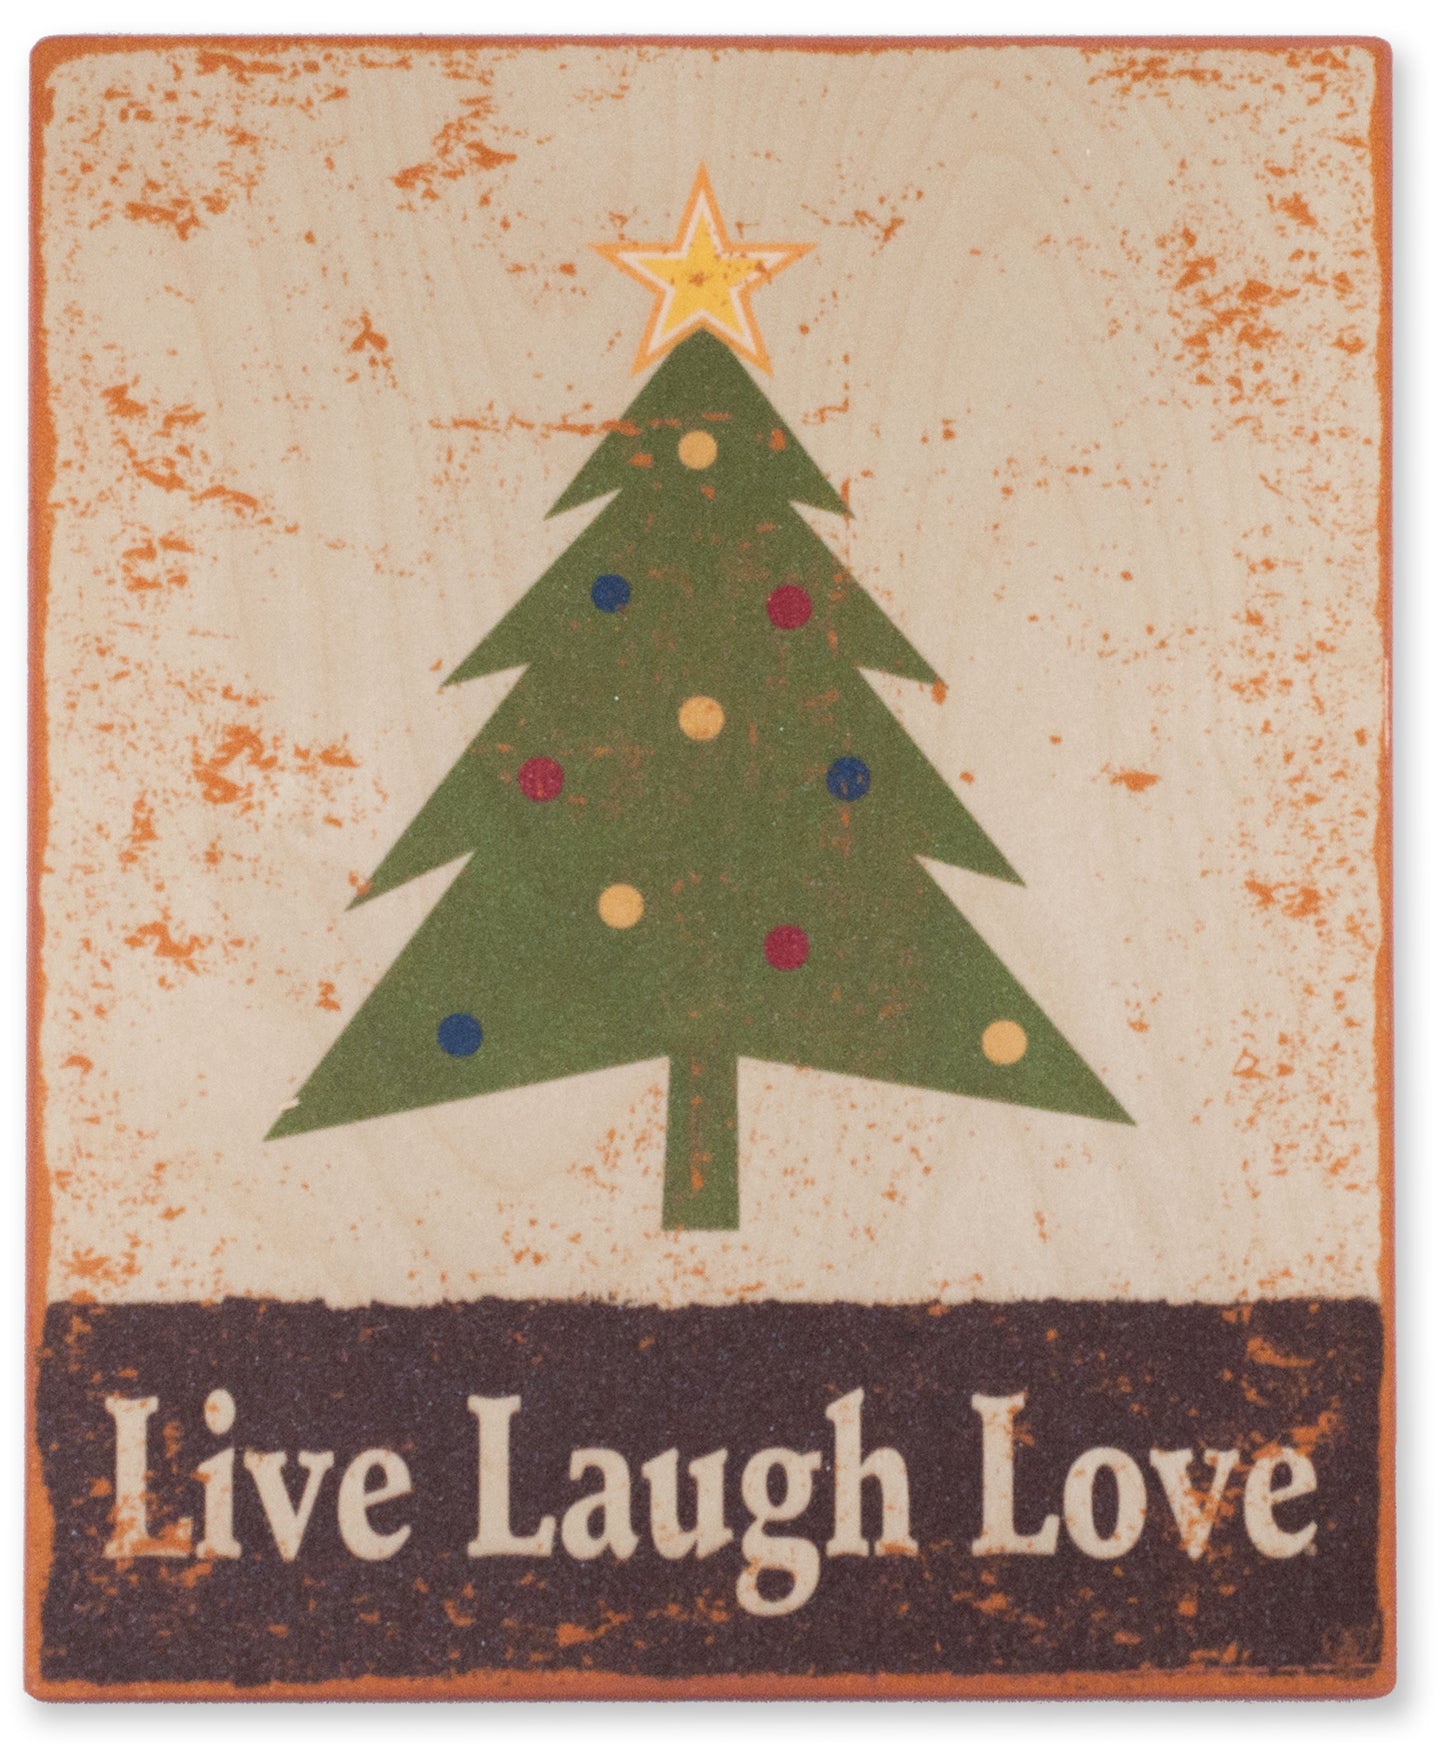 Star Topped Christmas Tree Wall Plaque Vintage Wood Sign Plaque by Live Laugh Love®